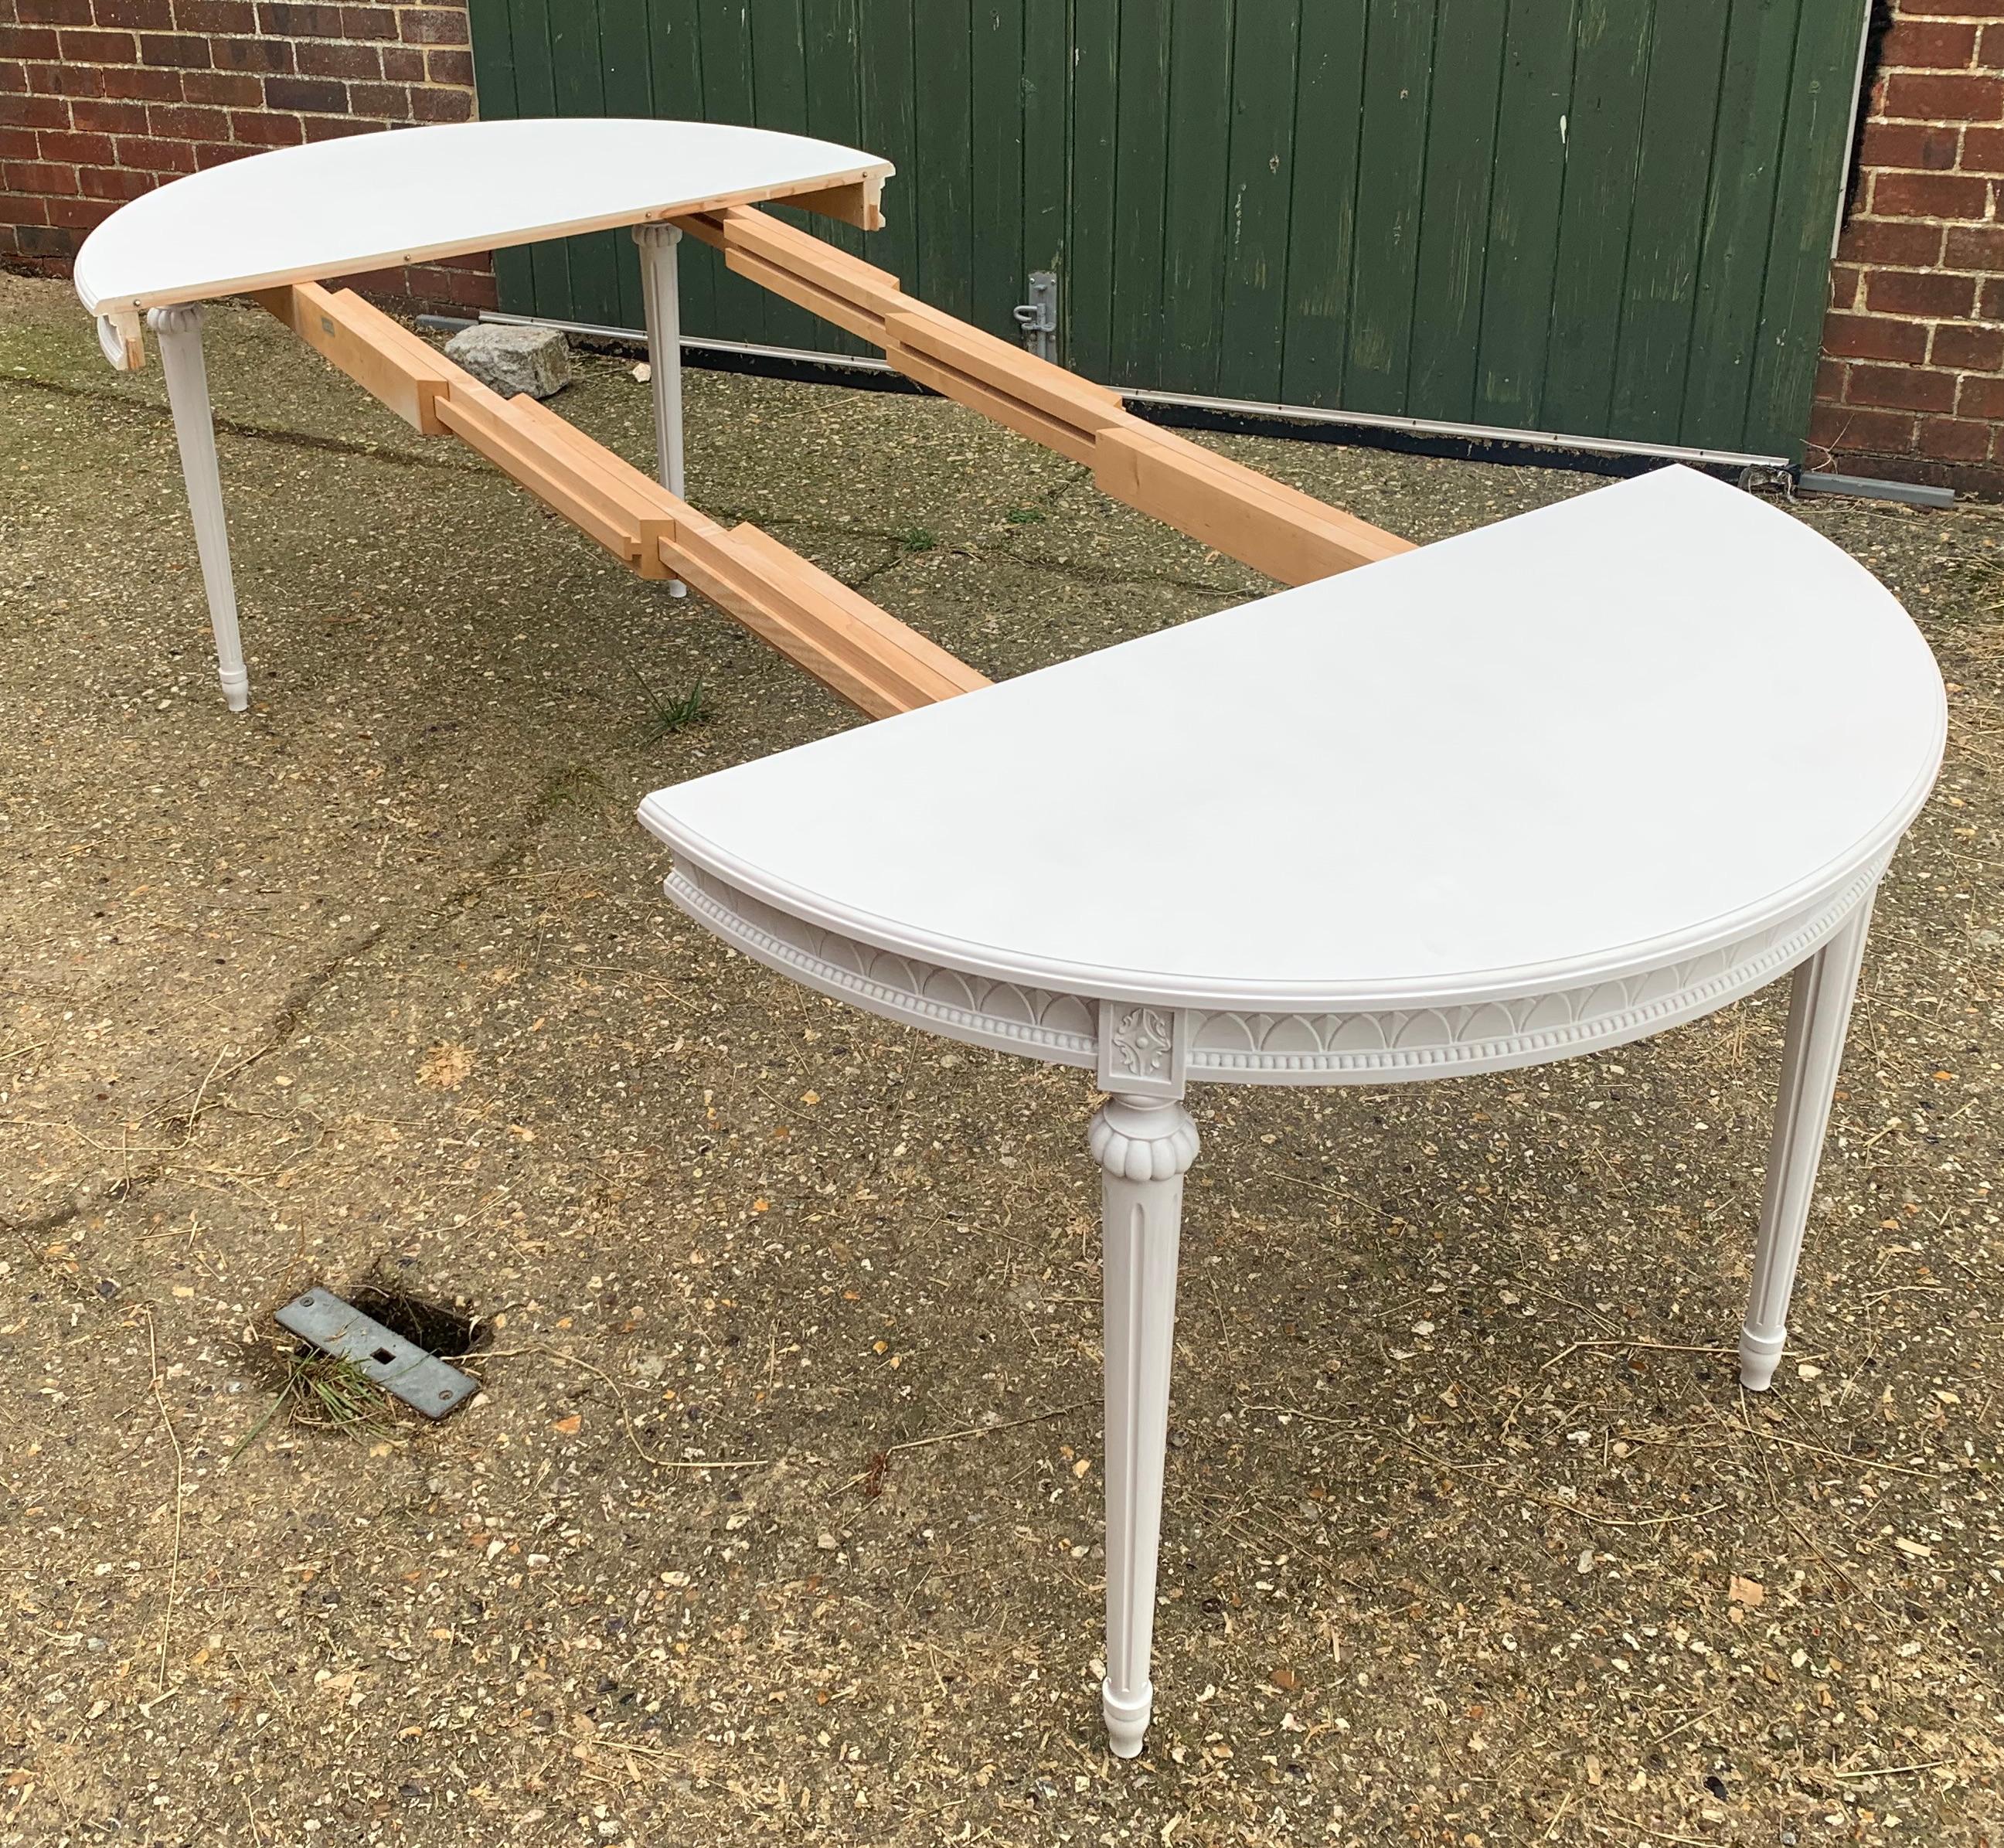 Swedish Gustavian white extendable dining table which extends from a round 110 cm approximately to 245 cm long with three leaves. It has the sort after egg and dart carved skirt detailing on the main table. Note on these original tables, the extra